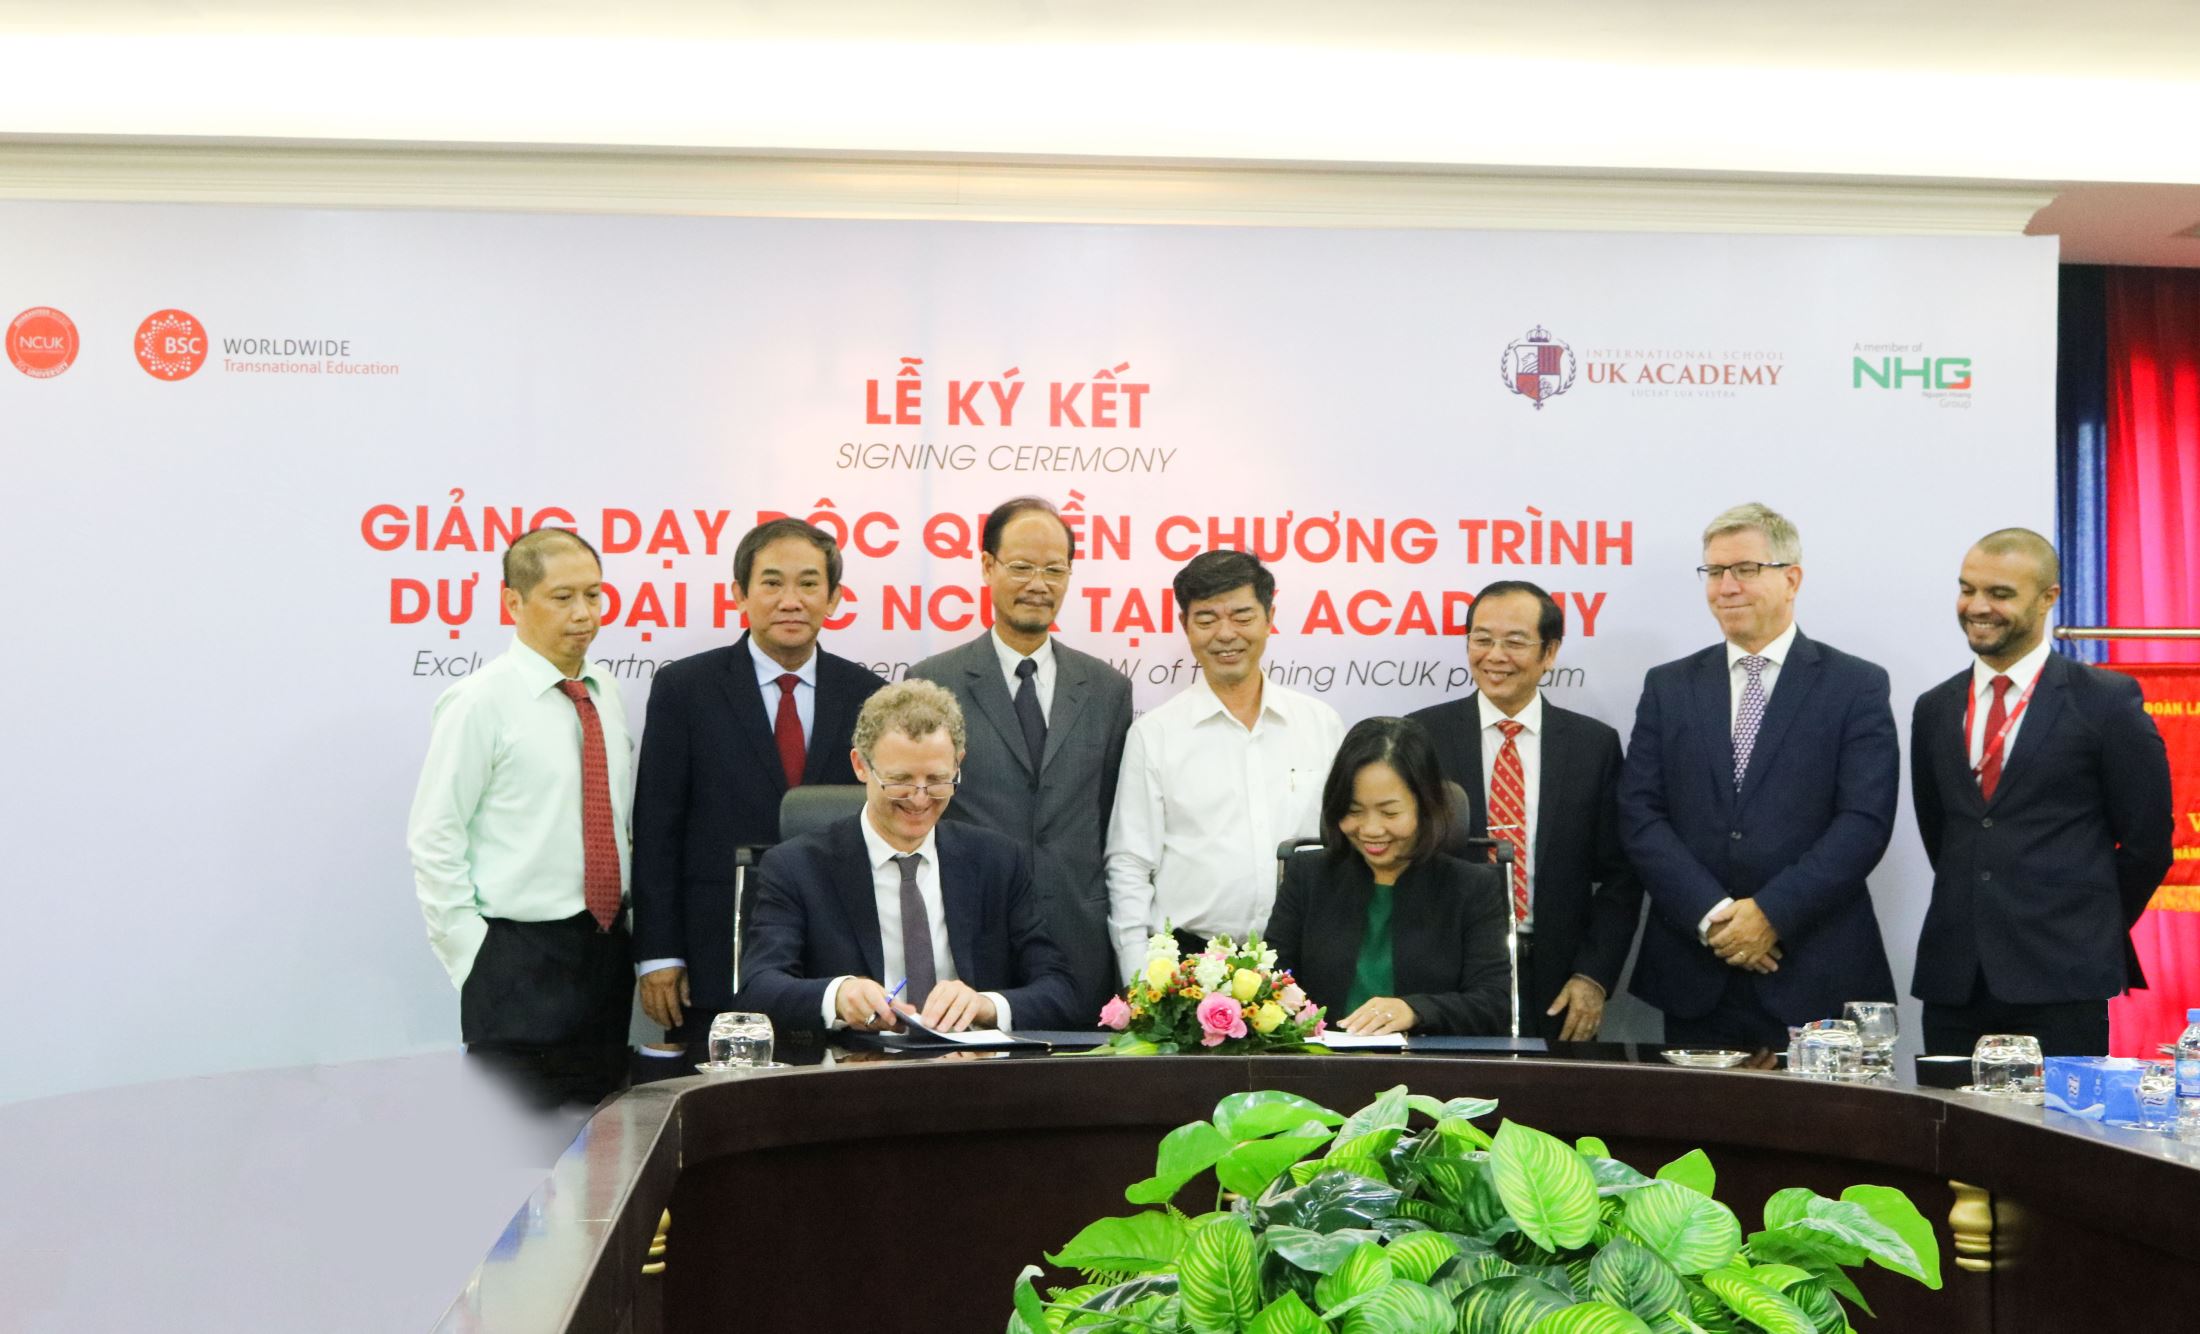 Ms. Tran Thi Kim Yen (right), Acting Director of K-12 Academic Affairs and Mr. Steve Philips (left), Managing Director of BSCW signing the MoU of exclusive teaching NCUK program in UK Academy